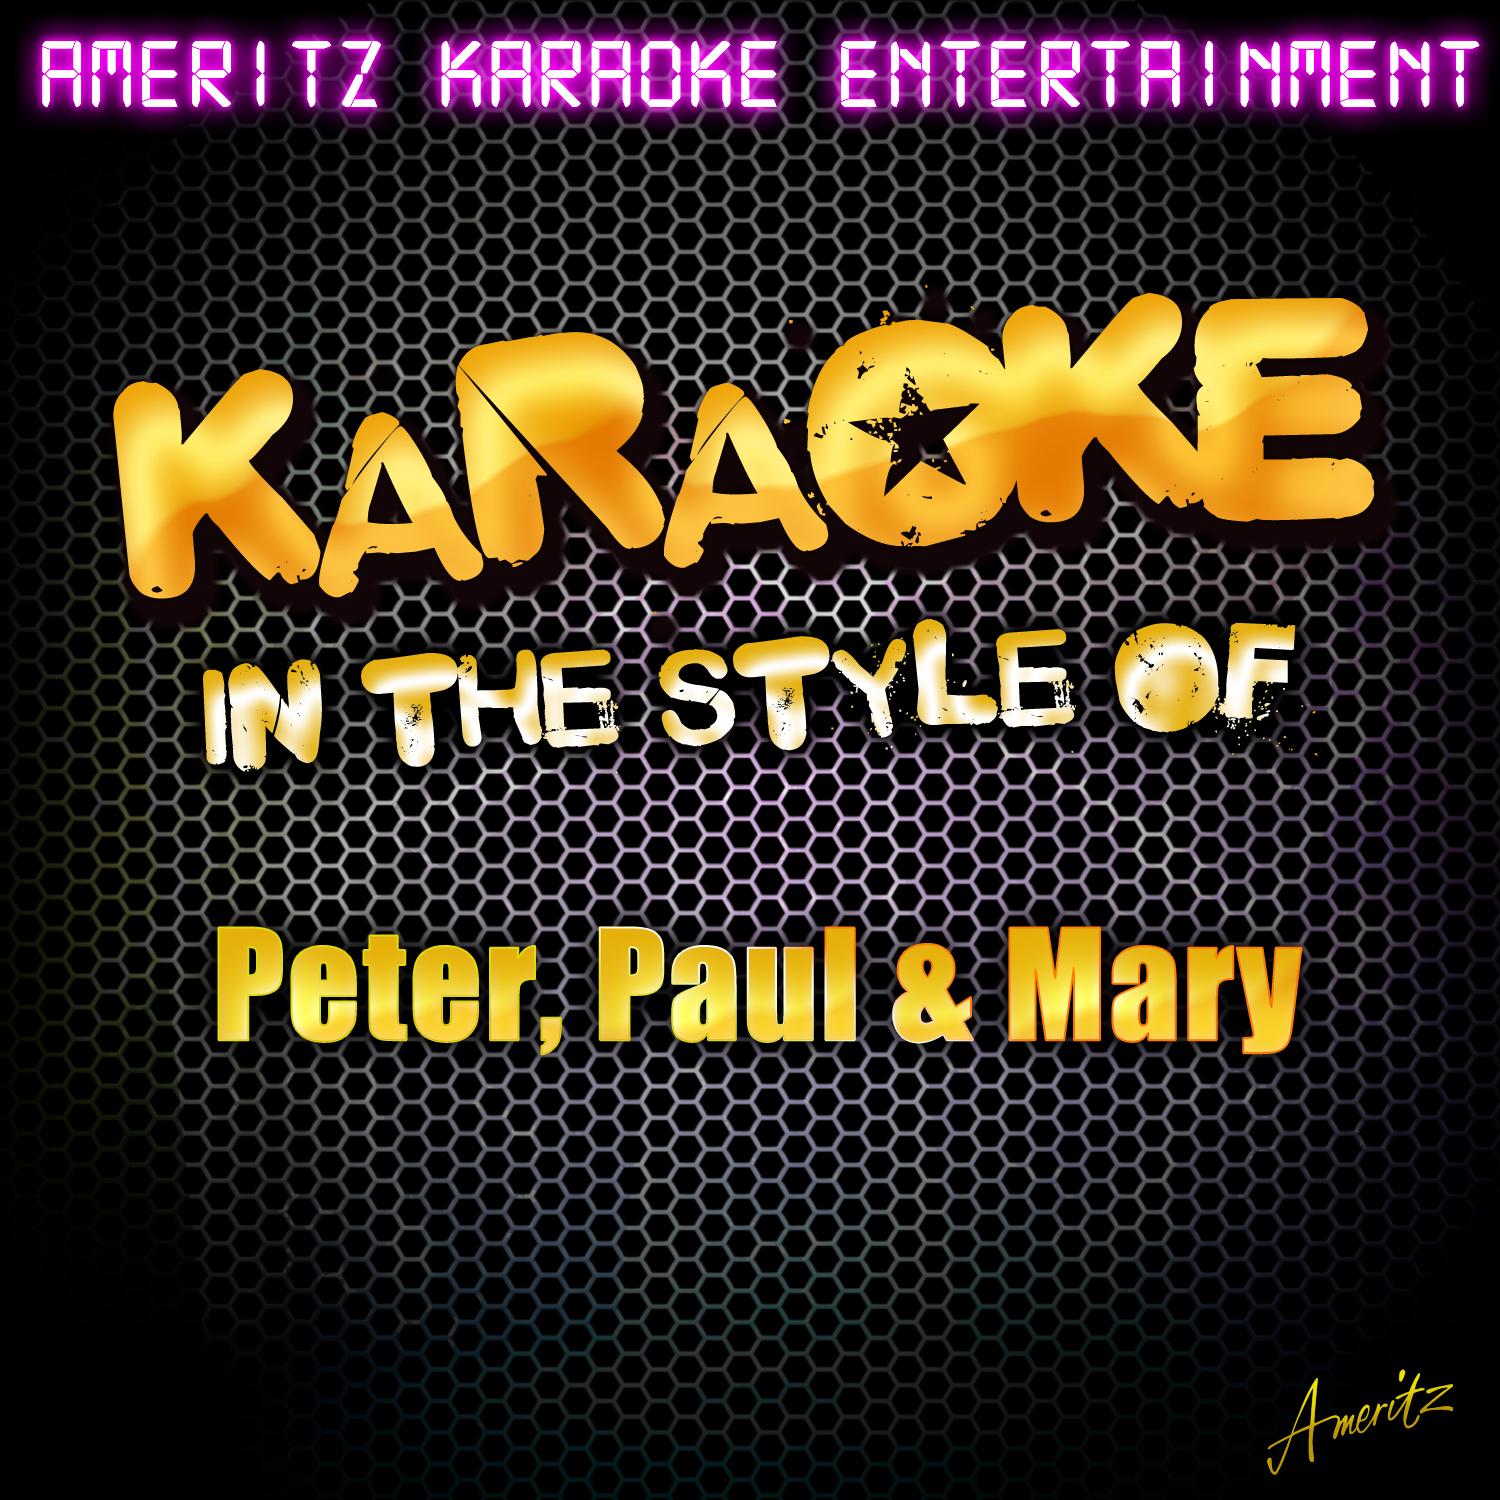 Karaoke (In the Style of Peter, Paul & Mary)